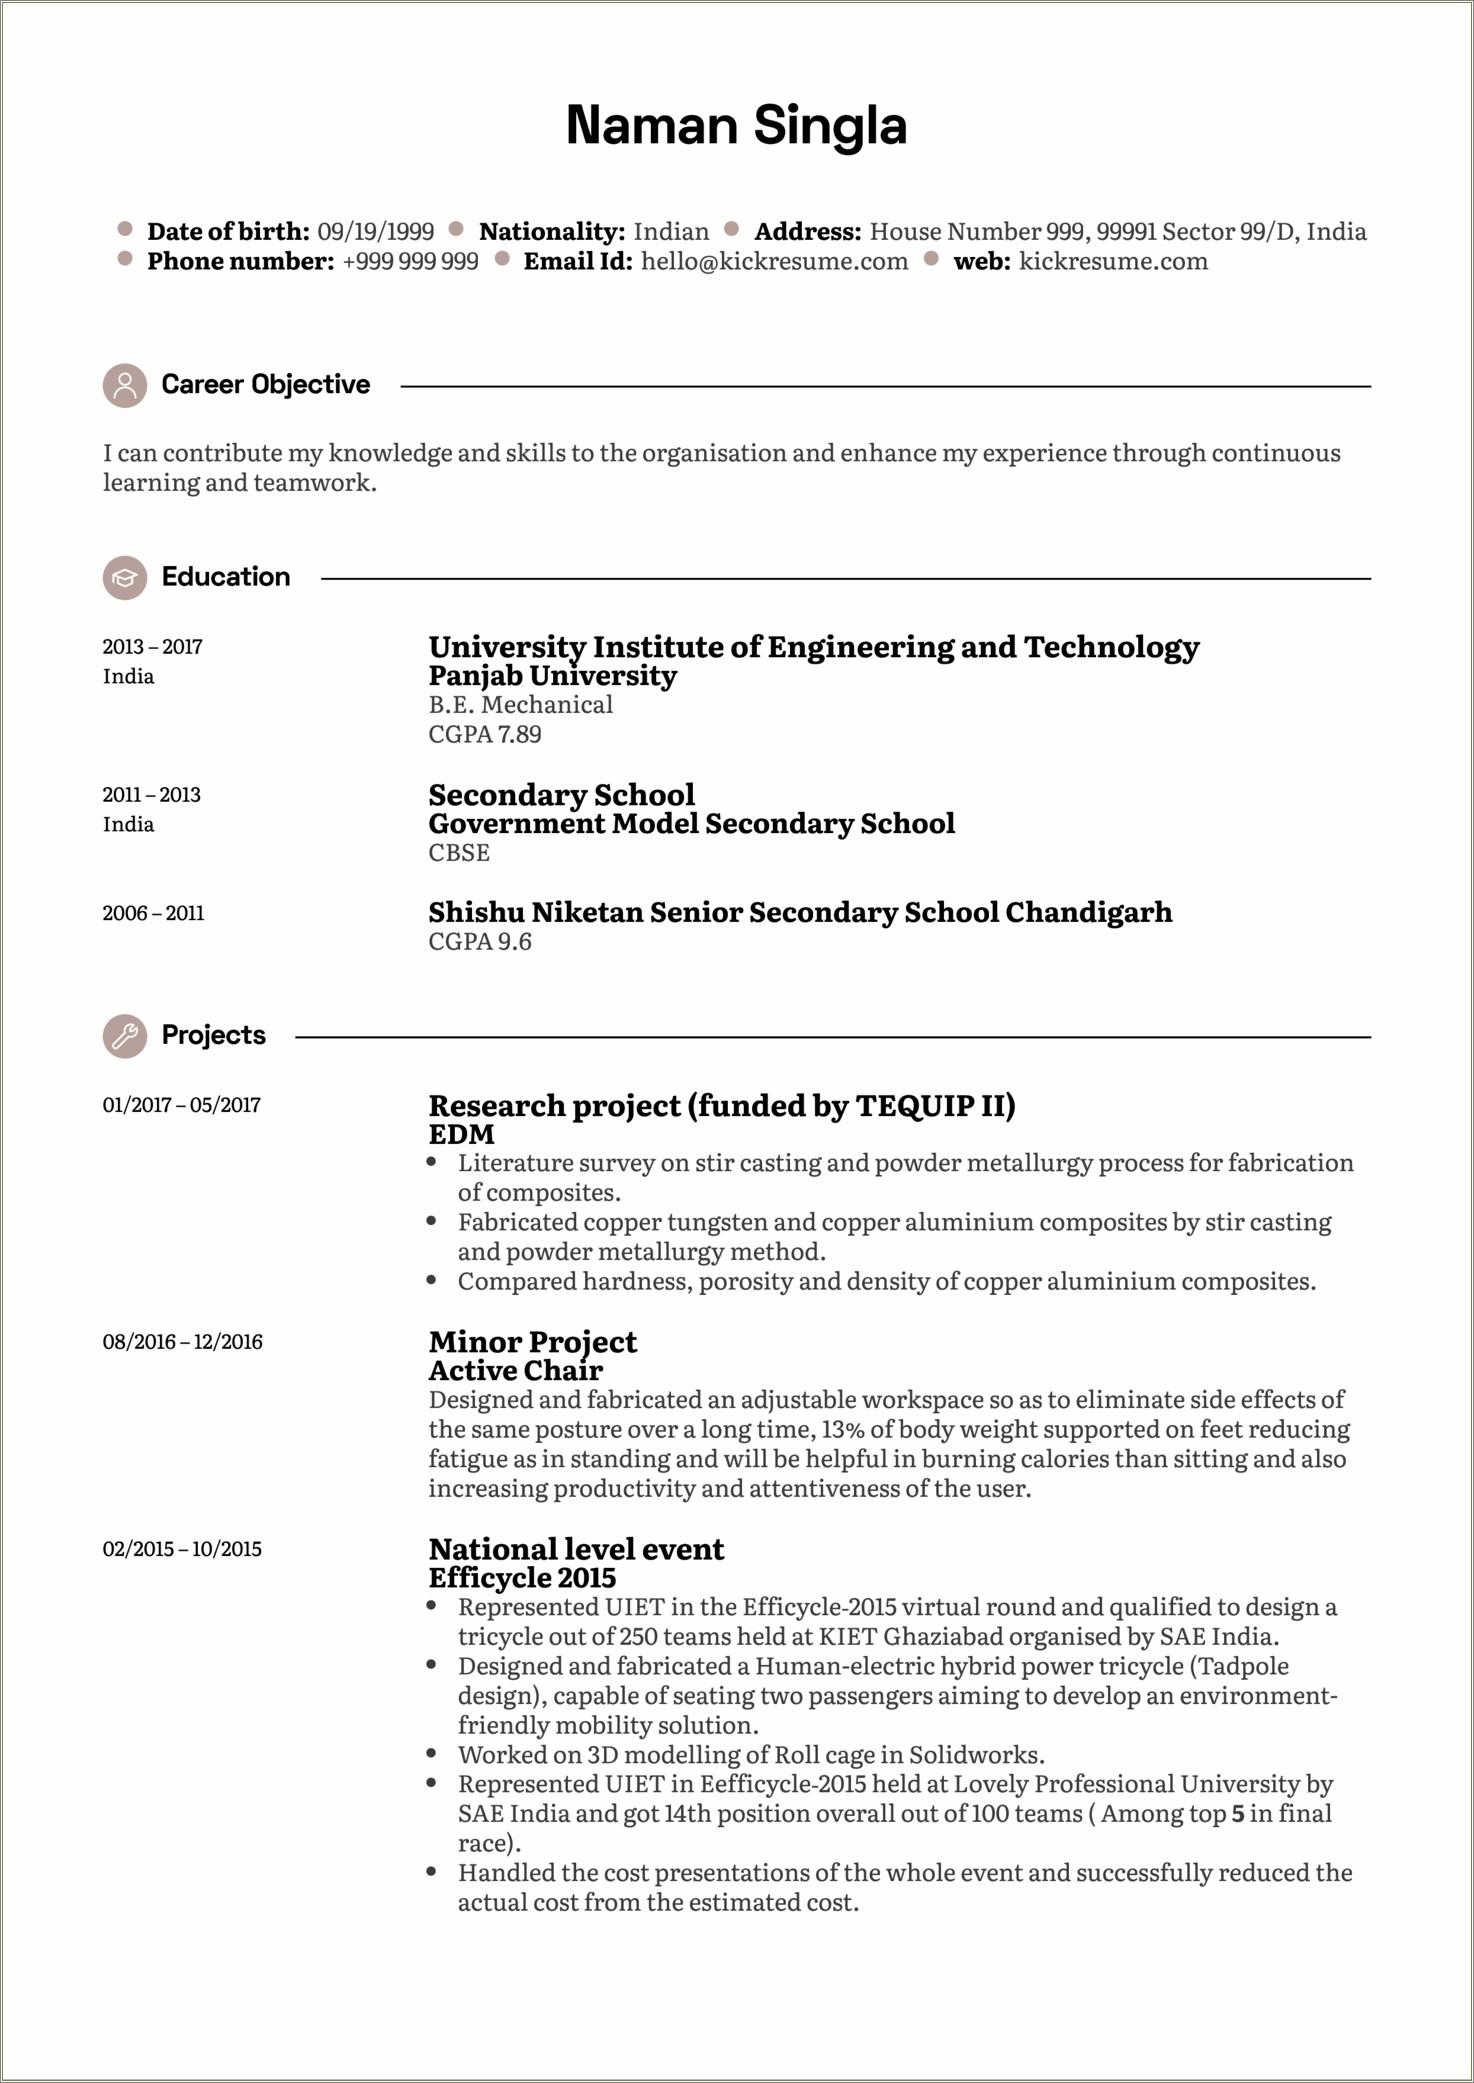 Sample Resume For Entry Level Research Assistant